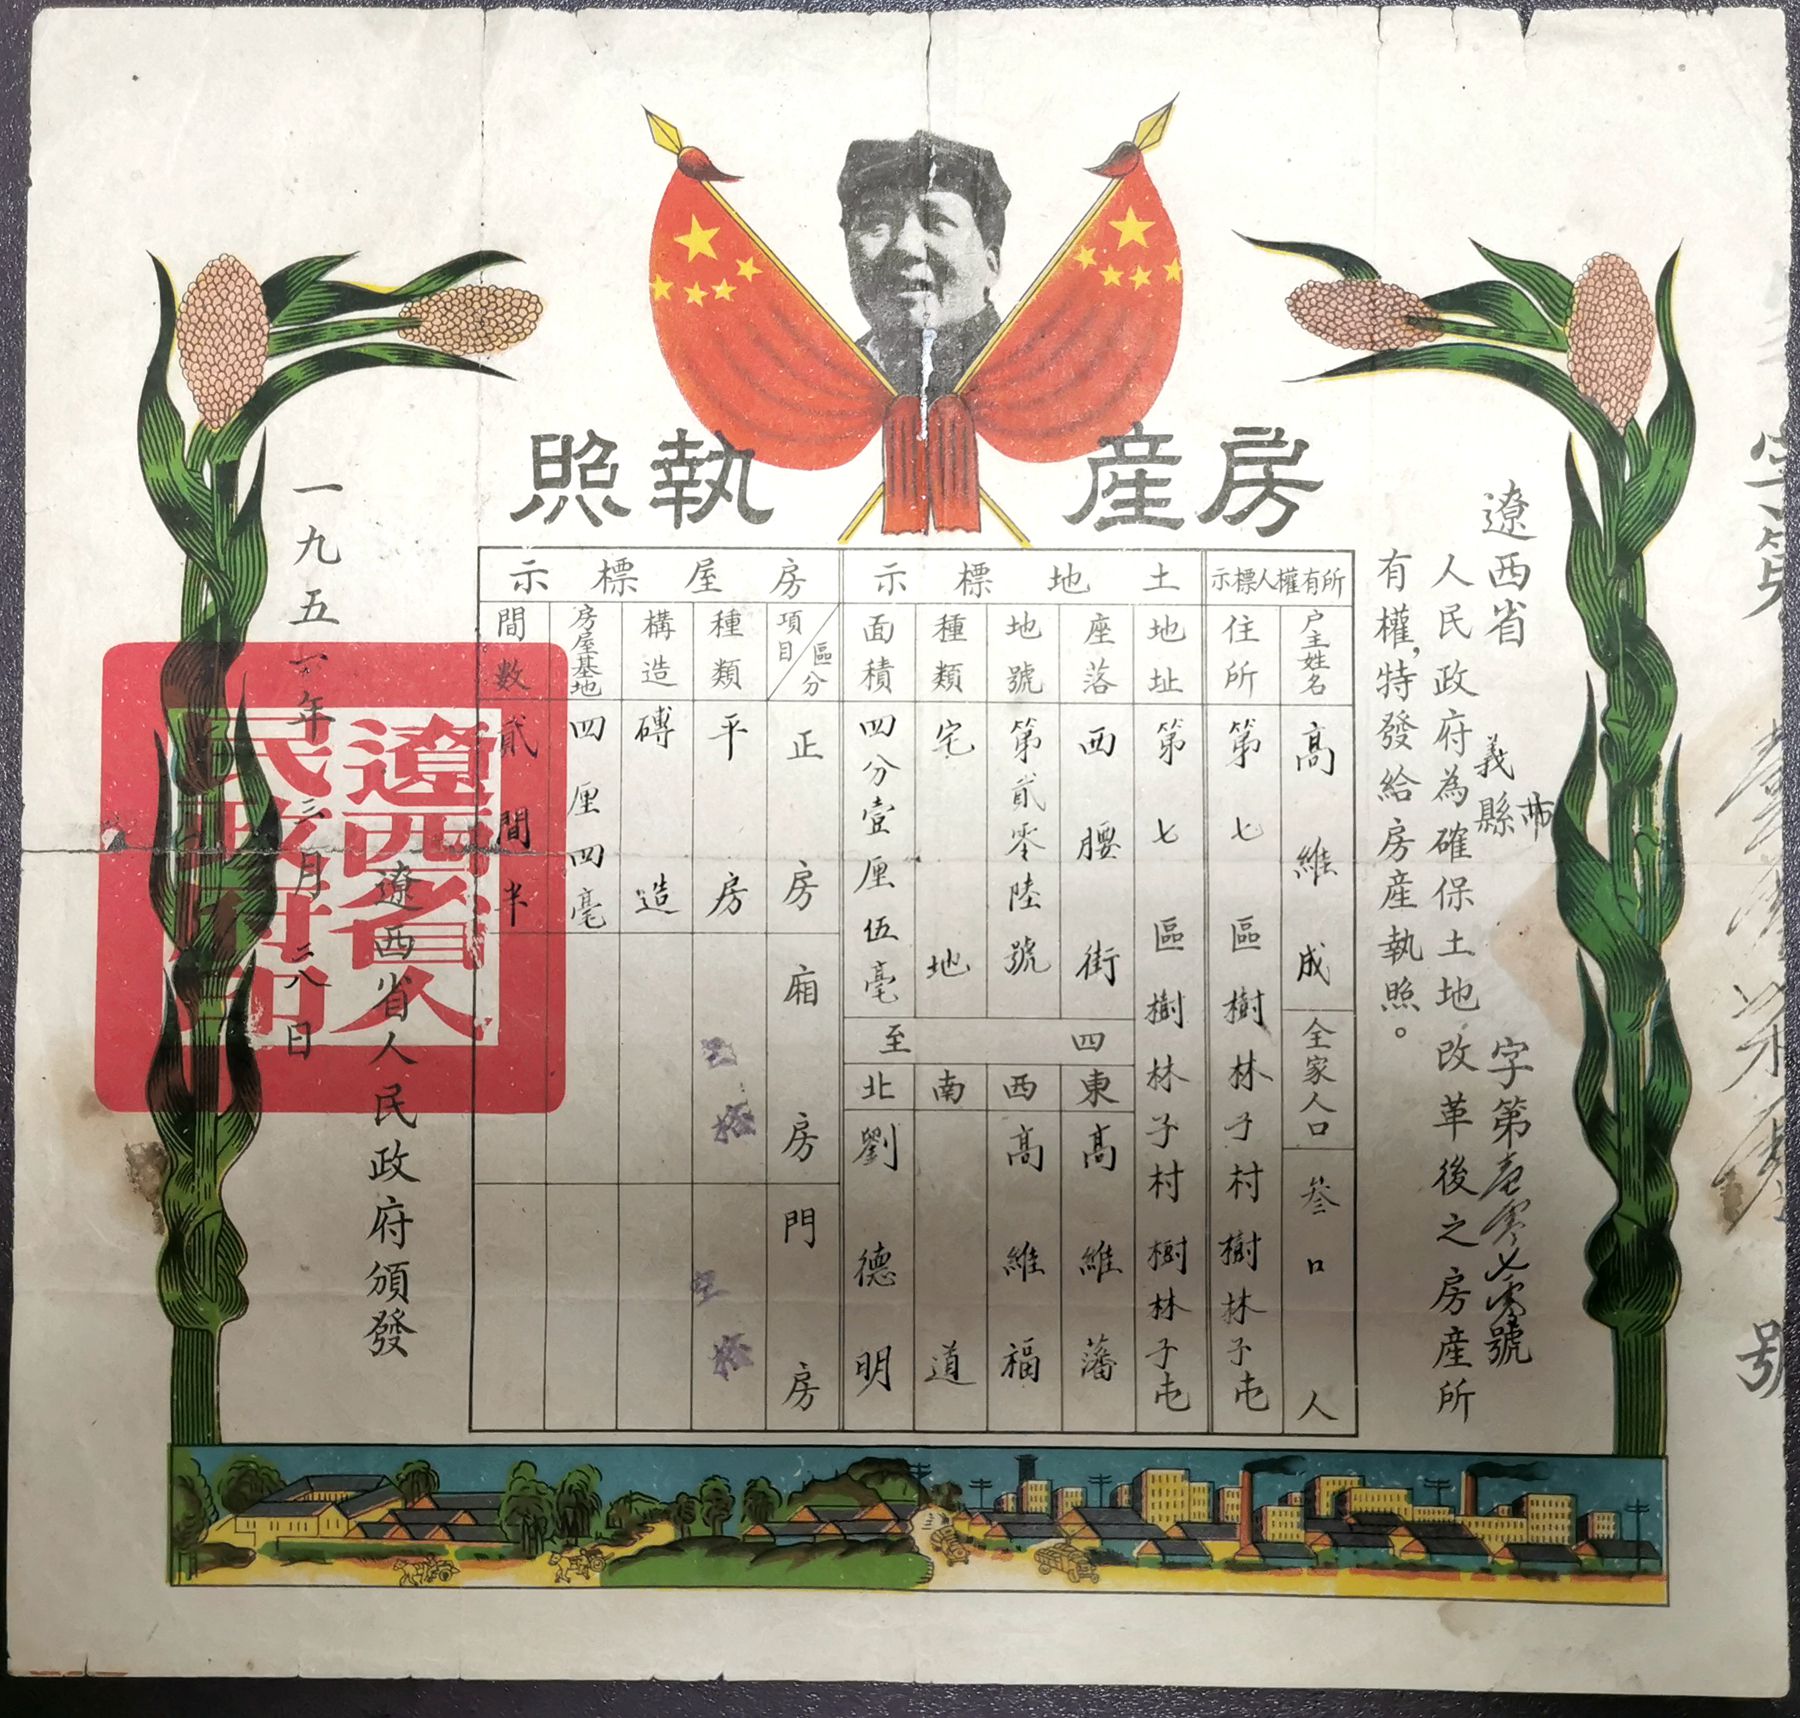 D4036, Land Deed of Liaoxi Province, China 1950 with Chairman Mao